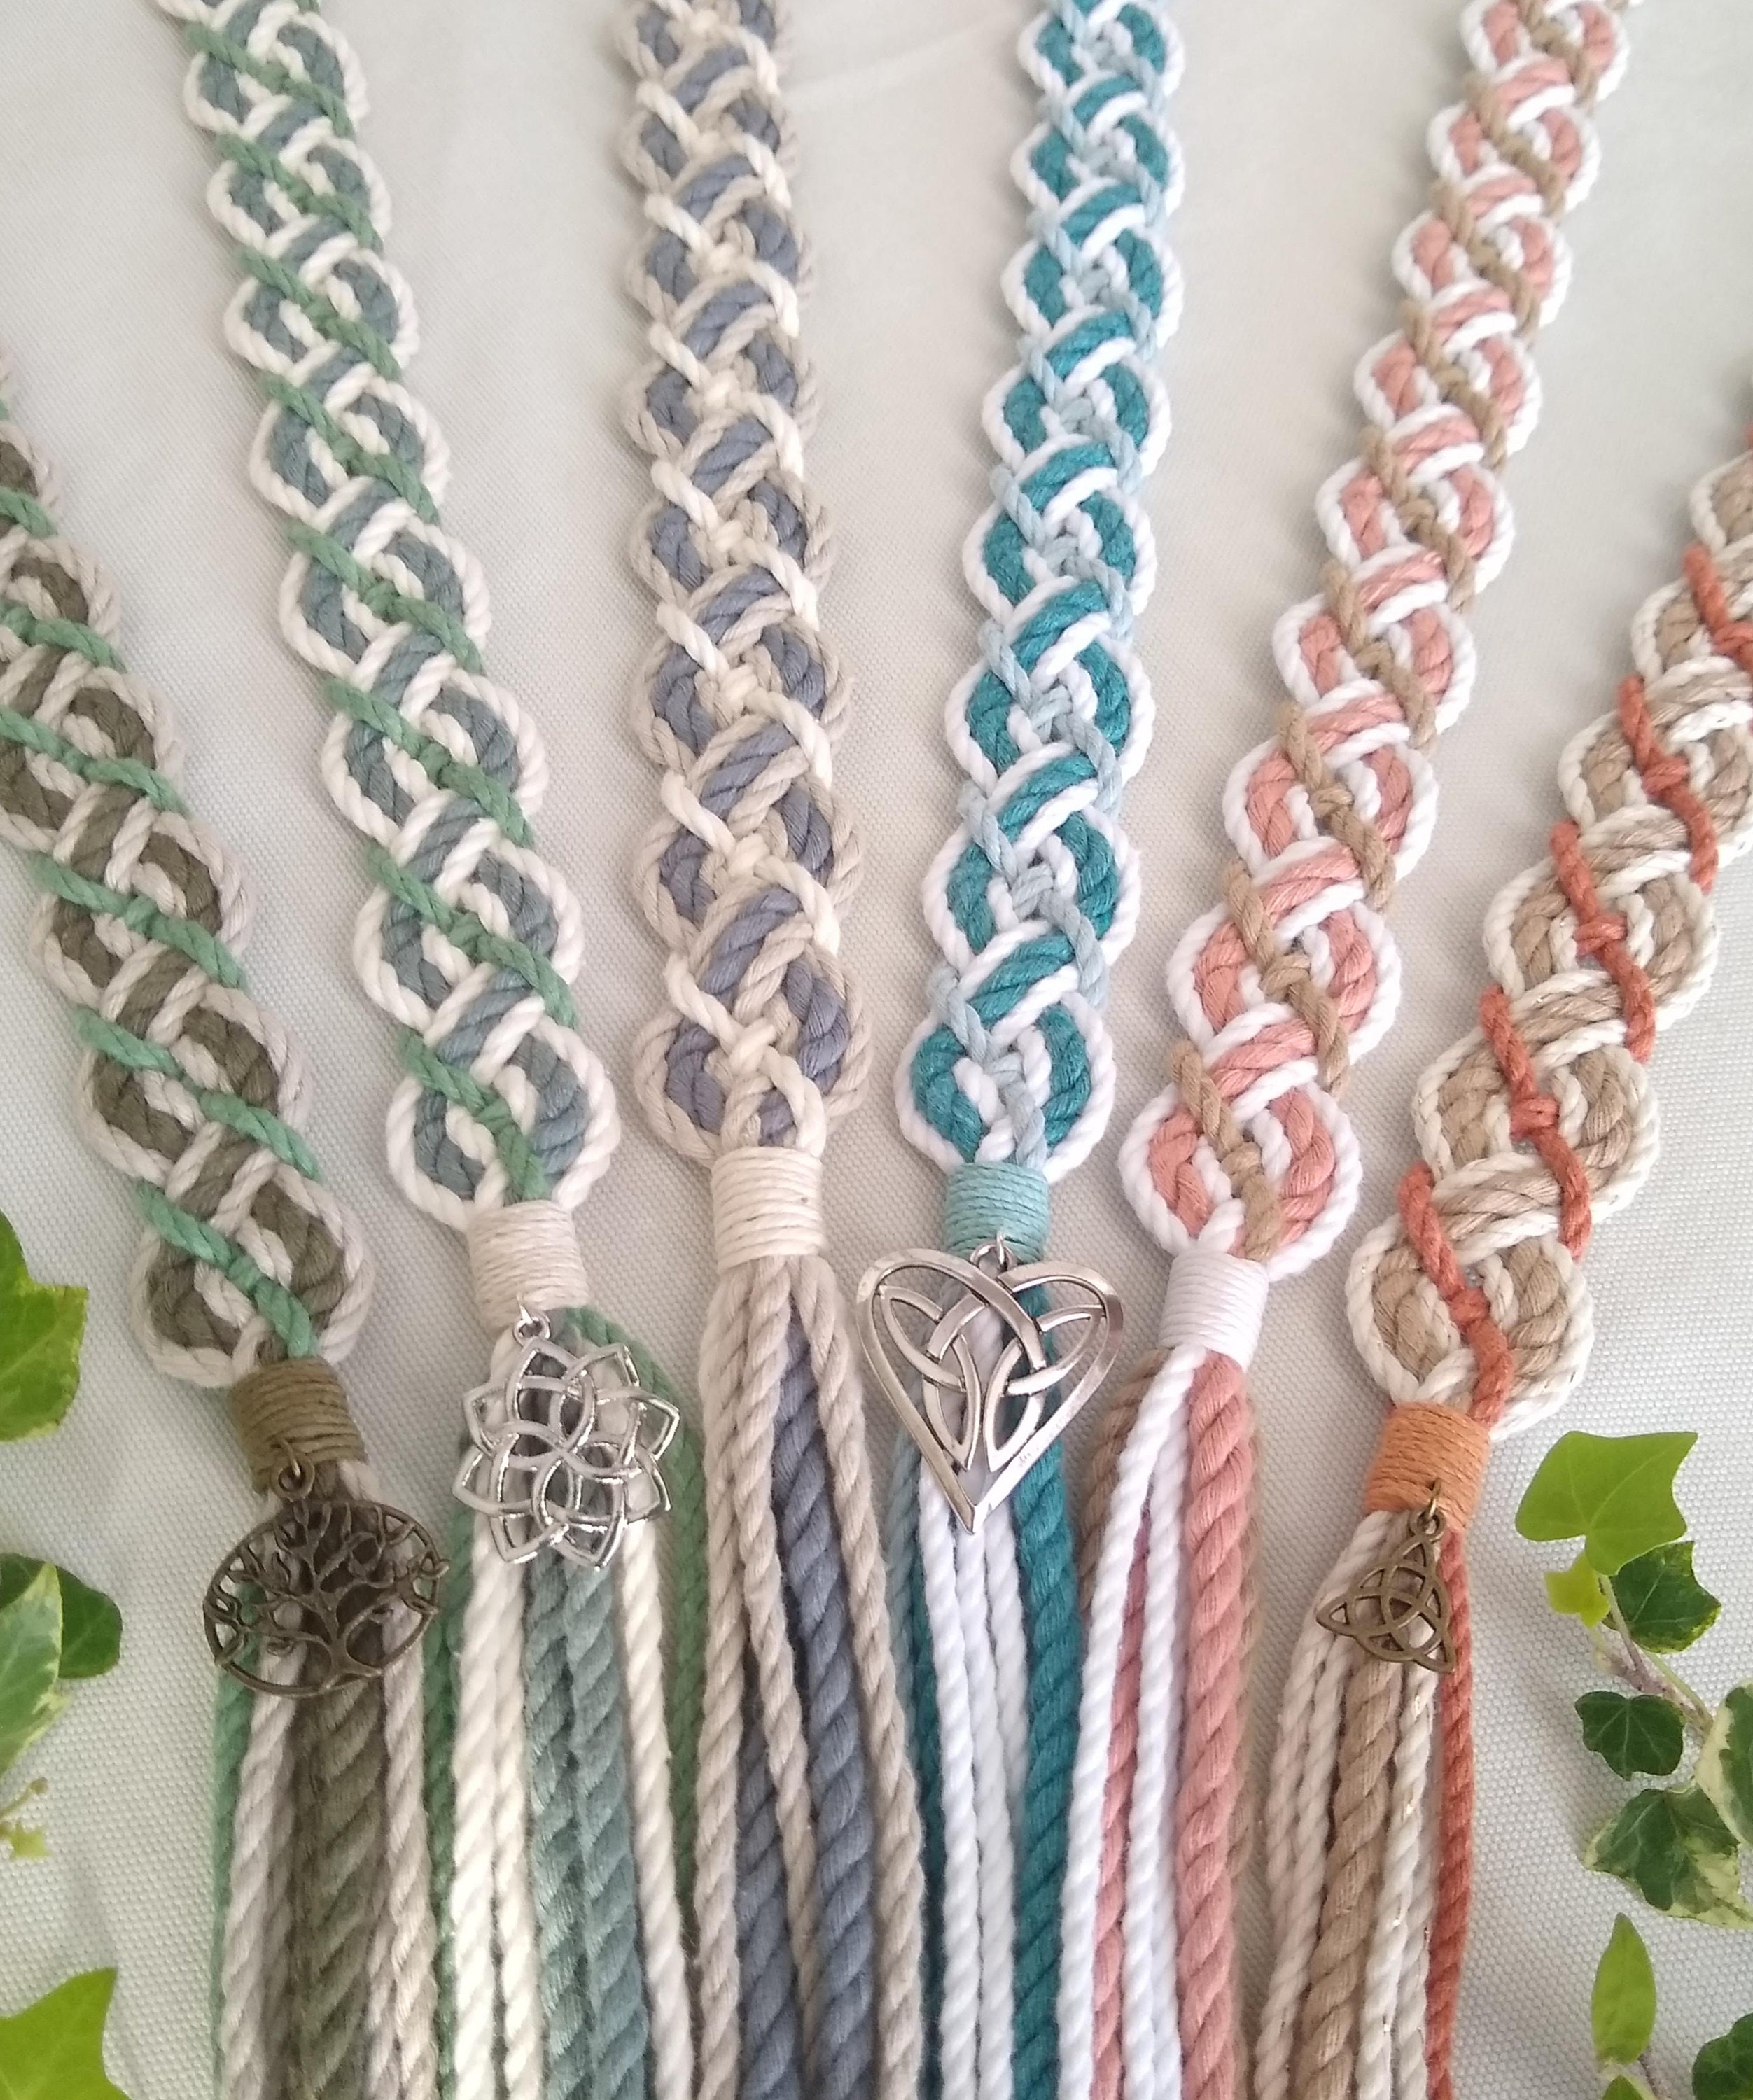 How to make a handfasting cord